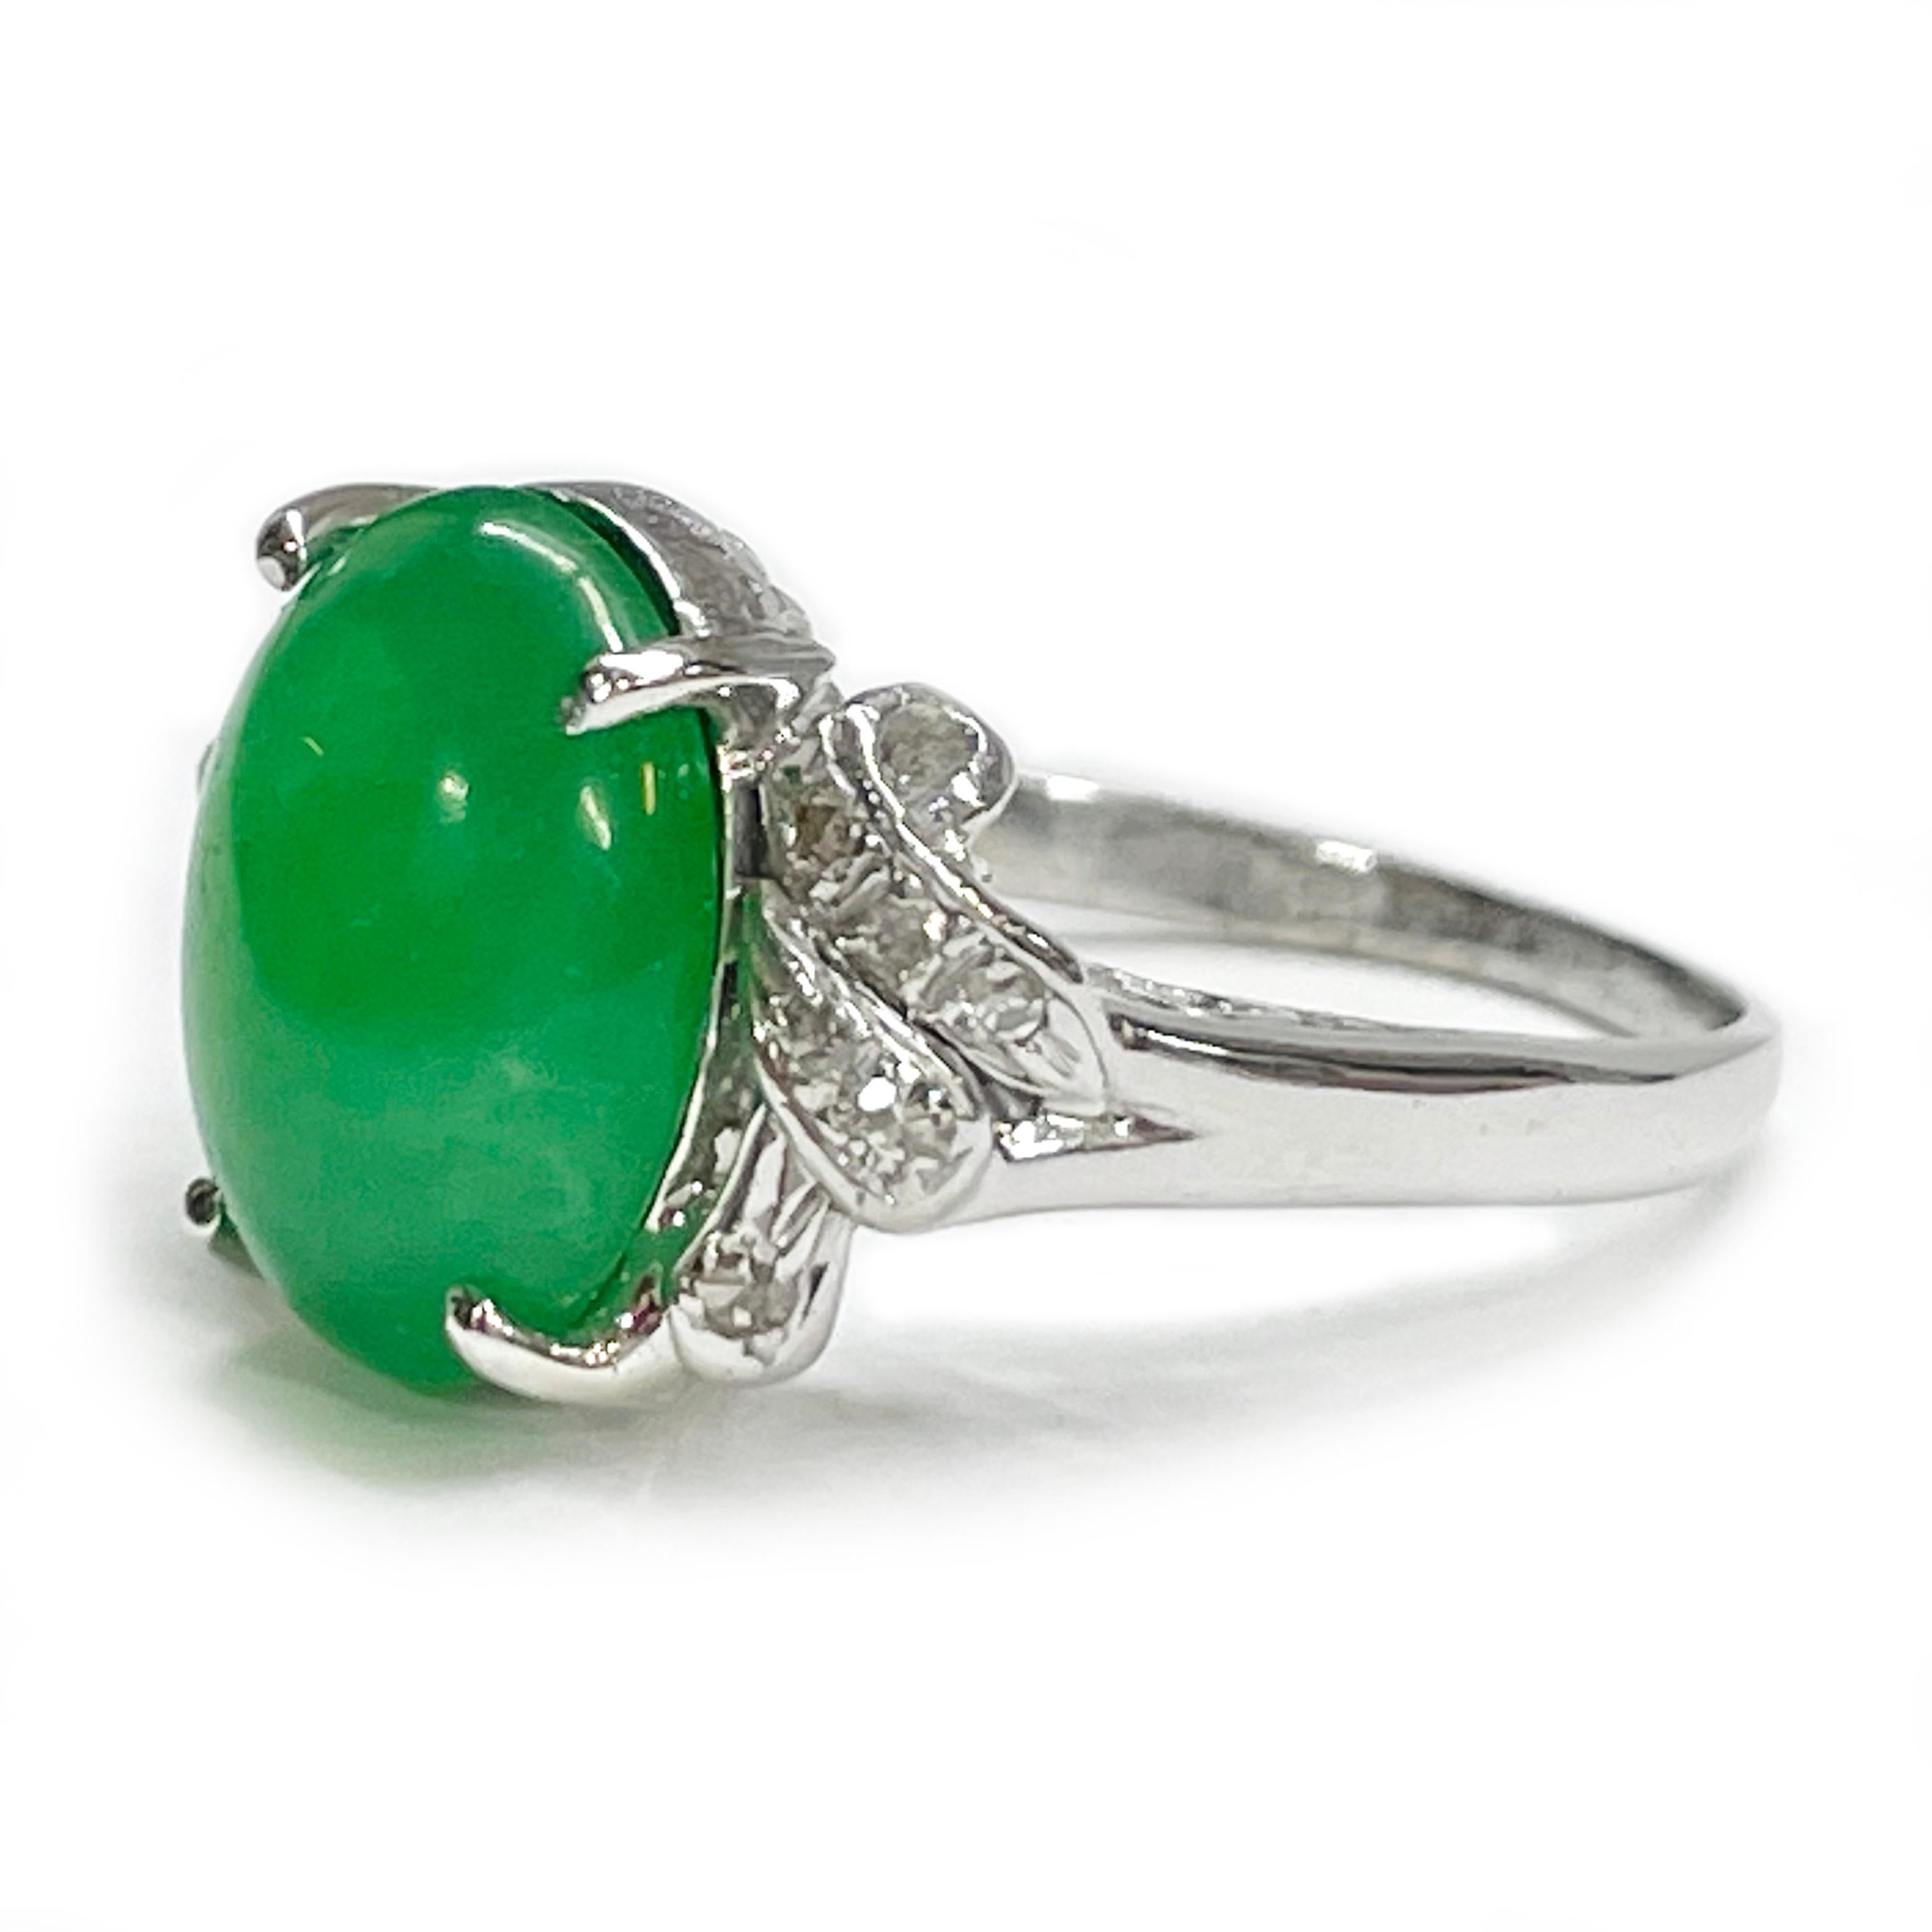 14 Karat White Gold Chrysoprase Diamond Ring. The ring features an green oval Chrysoprase cabochon four-prong set in the center of the ring and six small round melee diamonds on each side for a total of twelve diamonds. The stone has some light wear